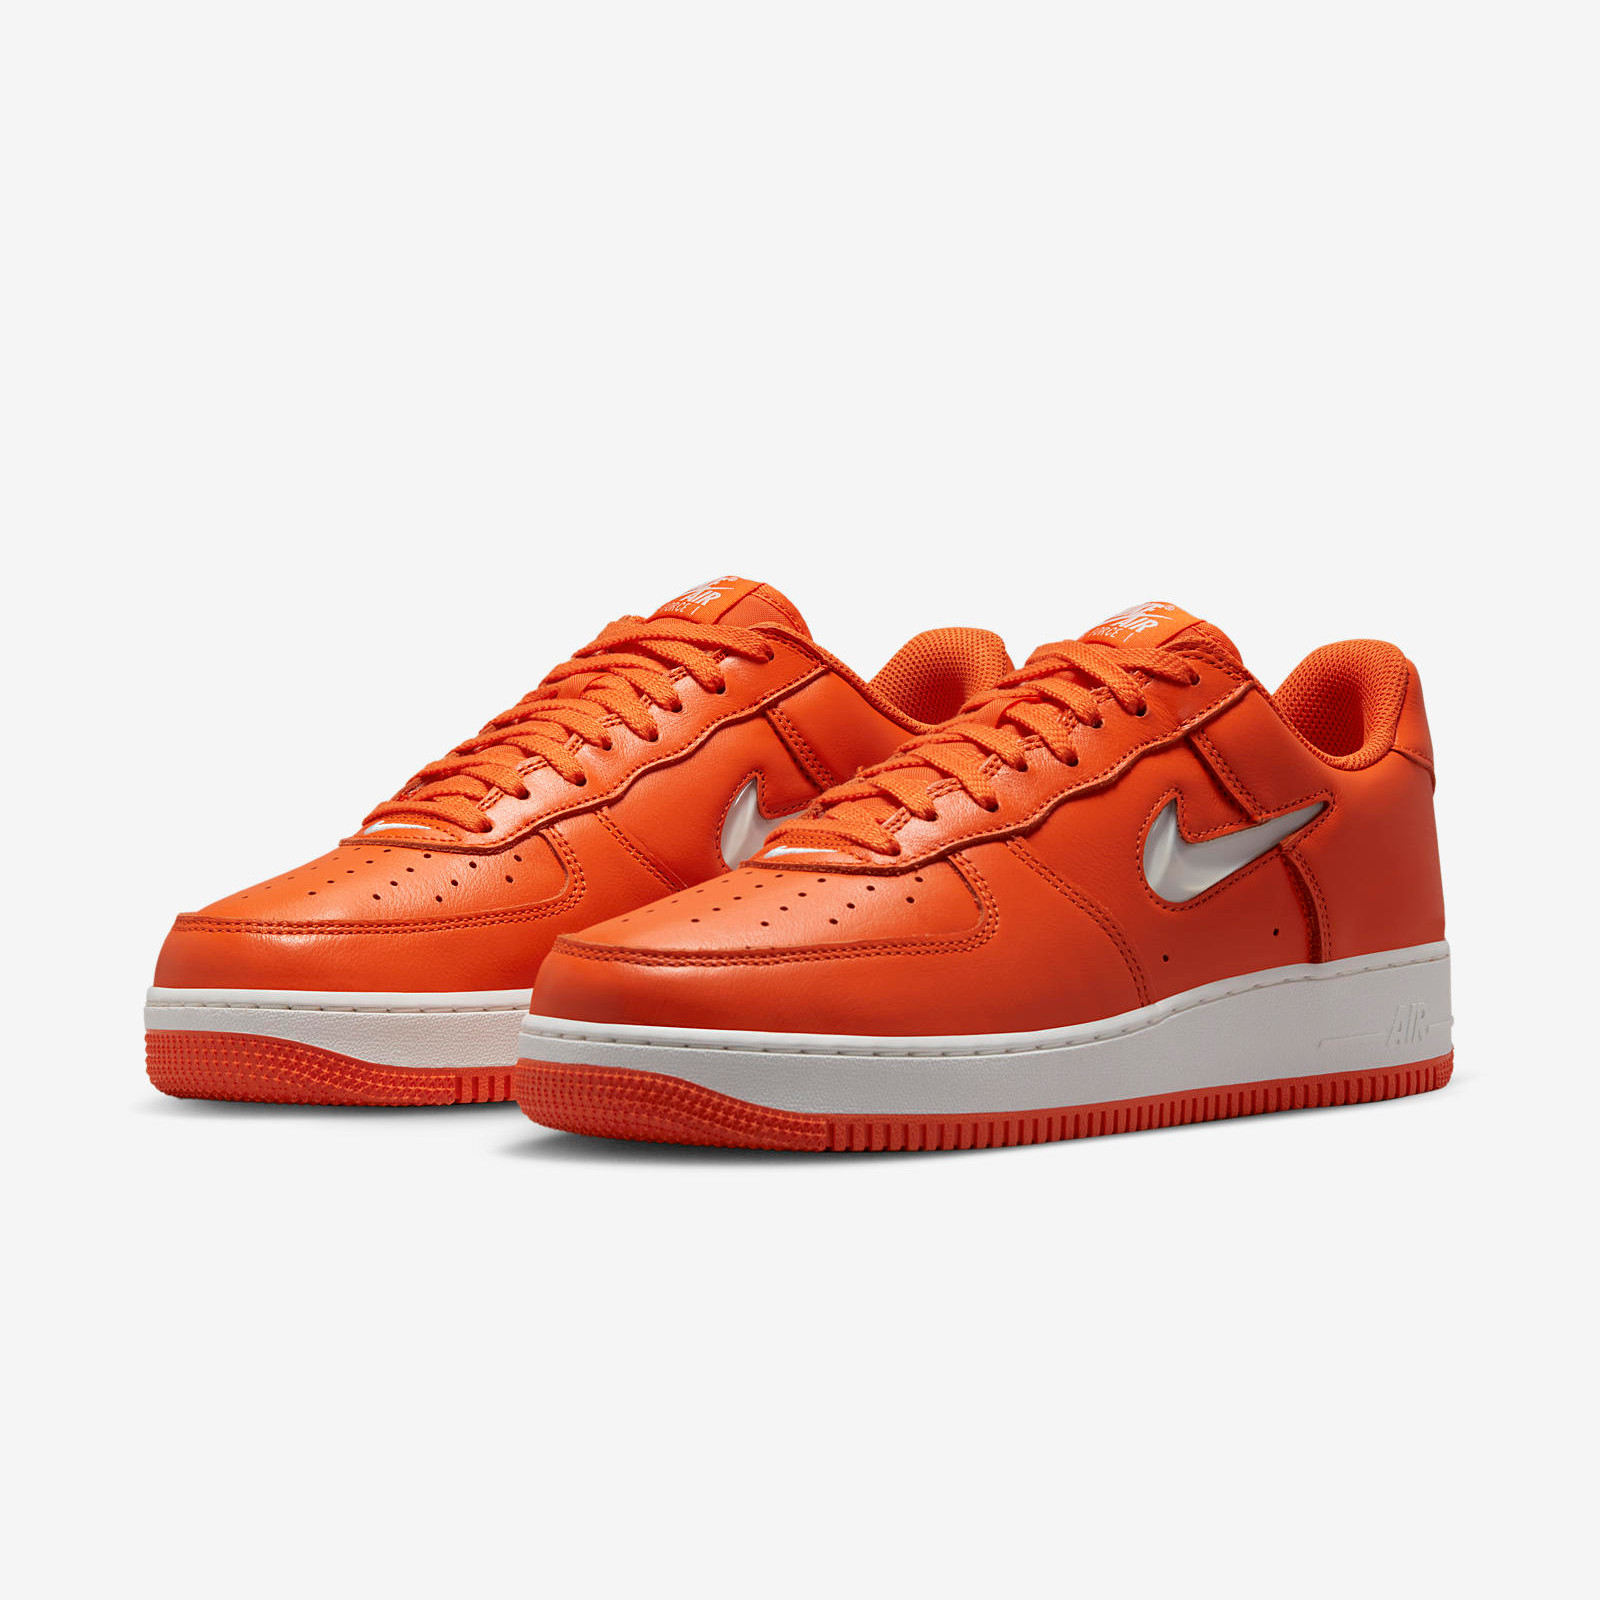 Nike Air Force 1
Color of the Month
« Safety Orange »